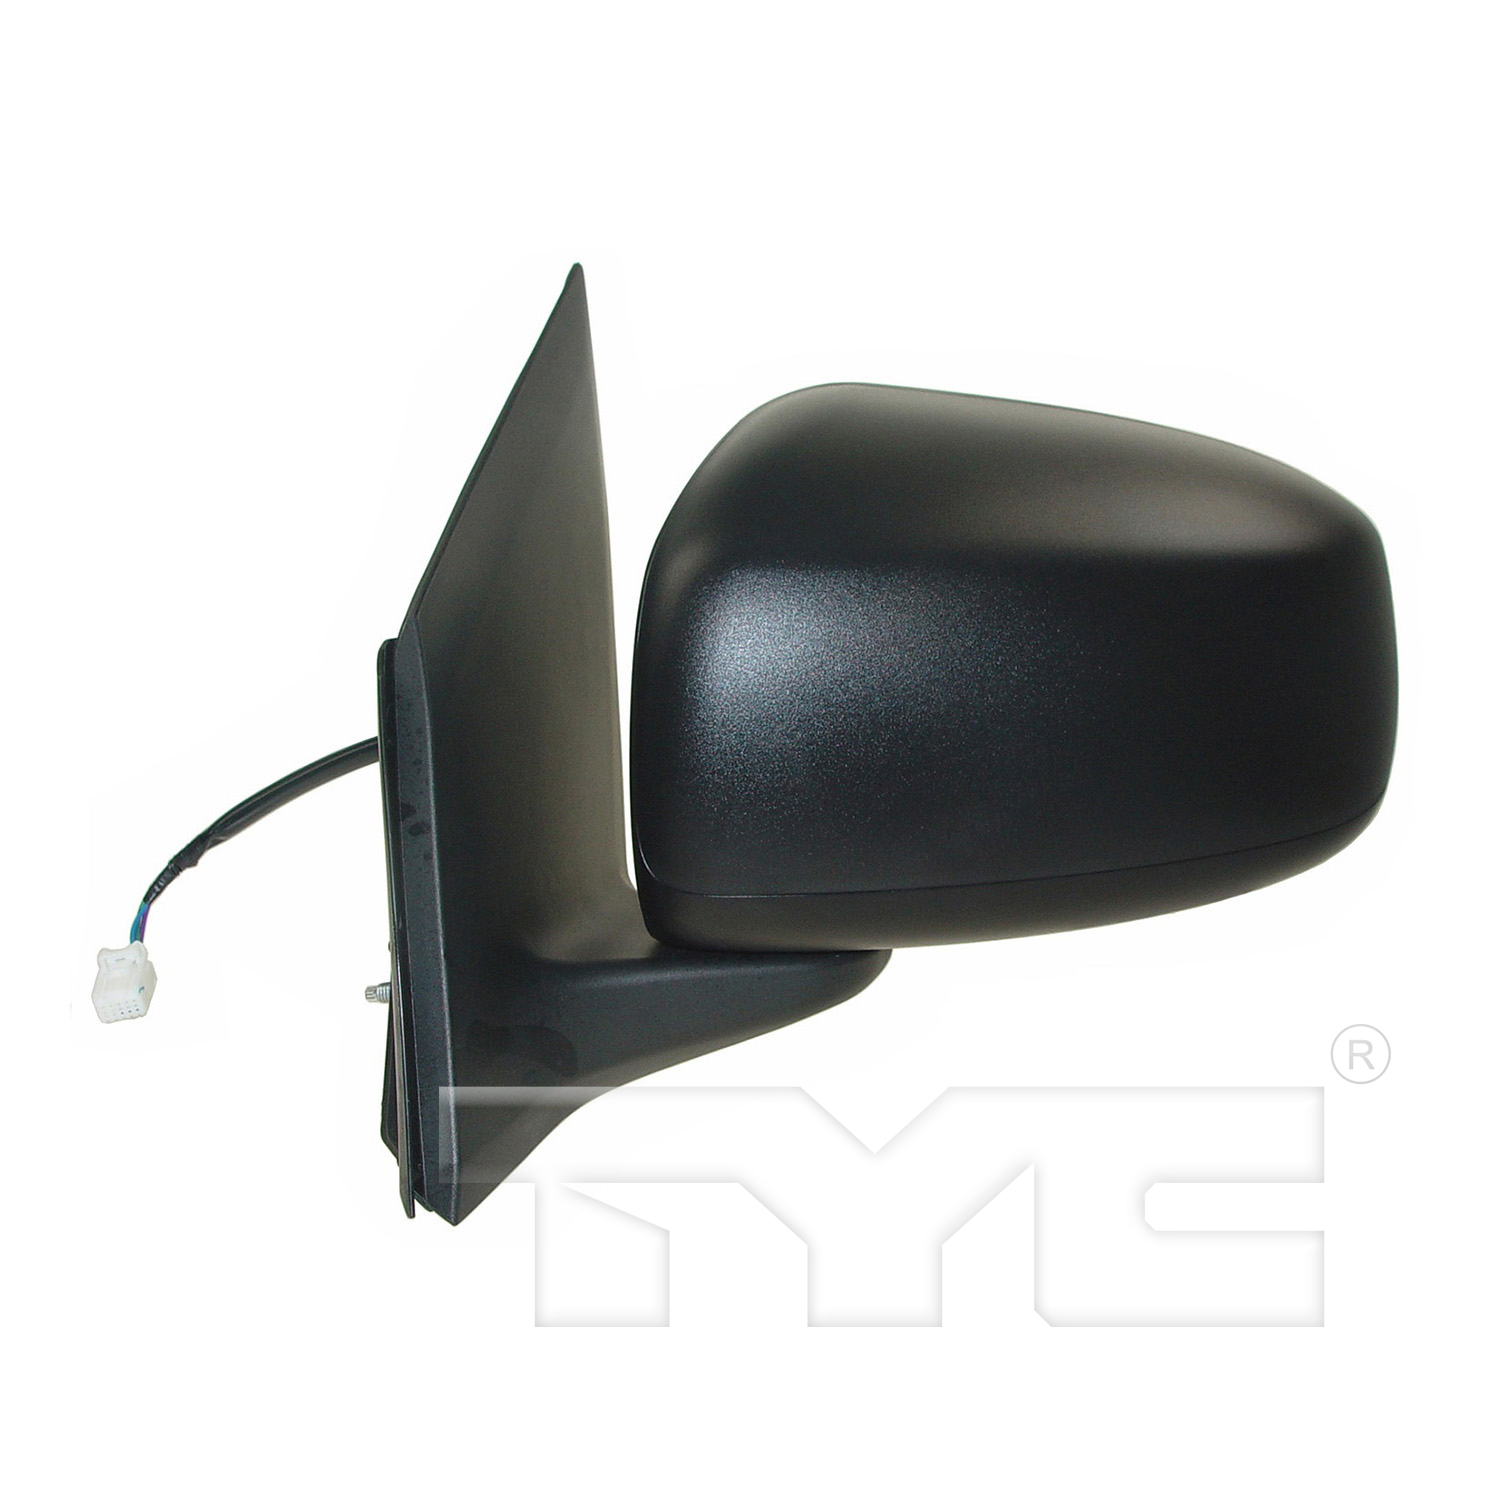 Aftermarket MIRRORS for MITSUBISHI - MIRAGE G4, MIRAGE G4,17-22,LT Mirror outside rear view